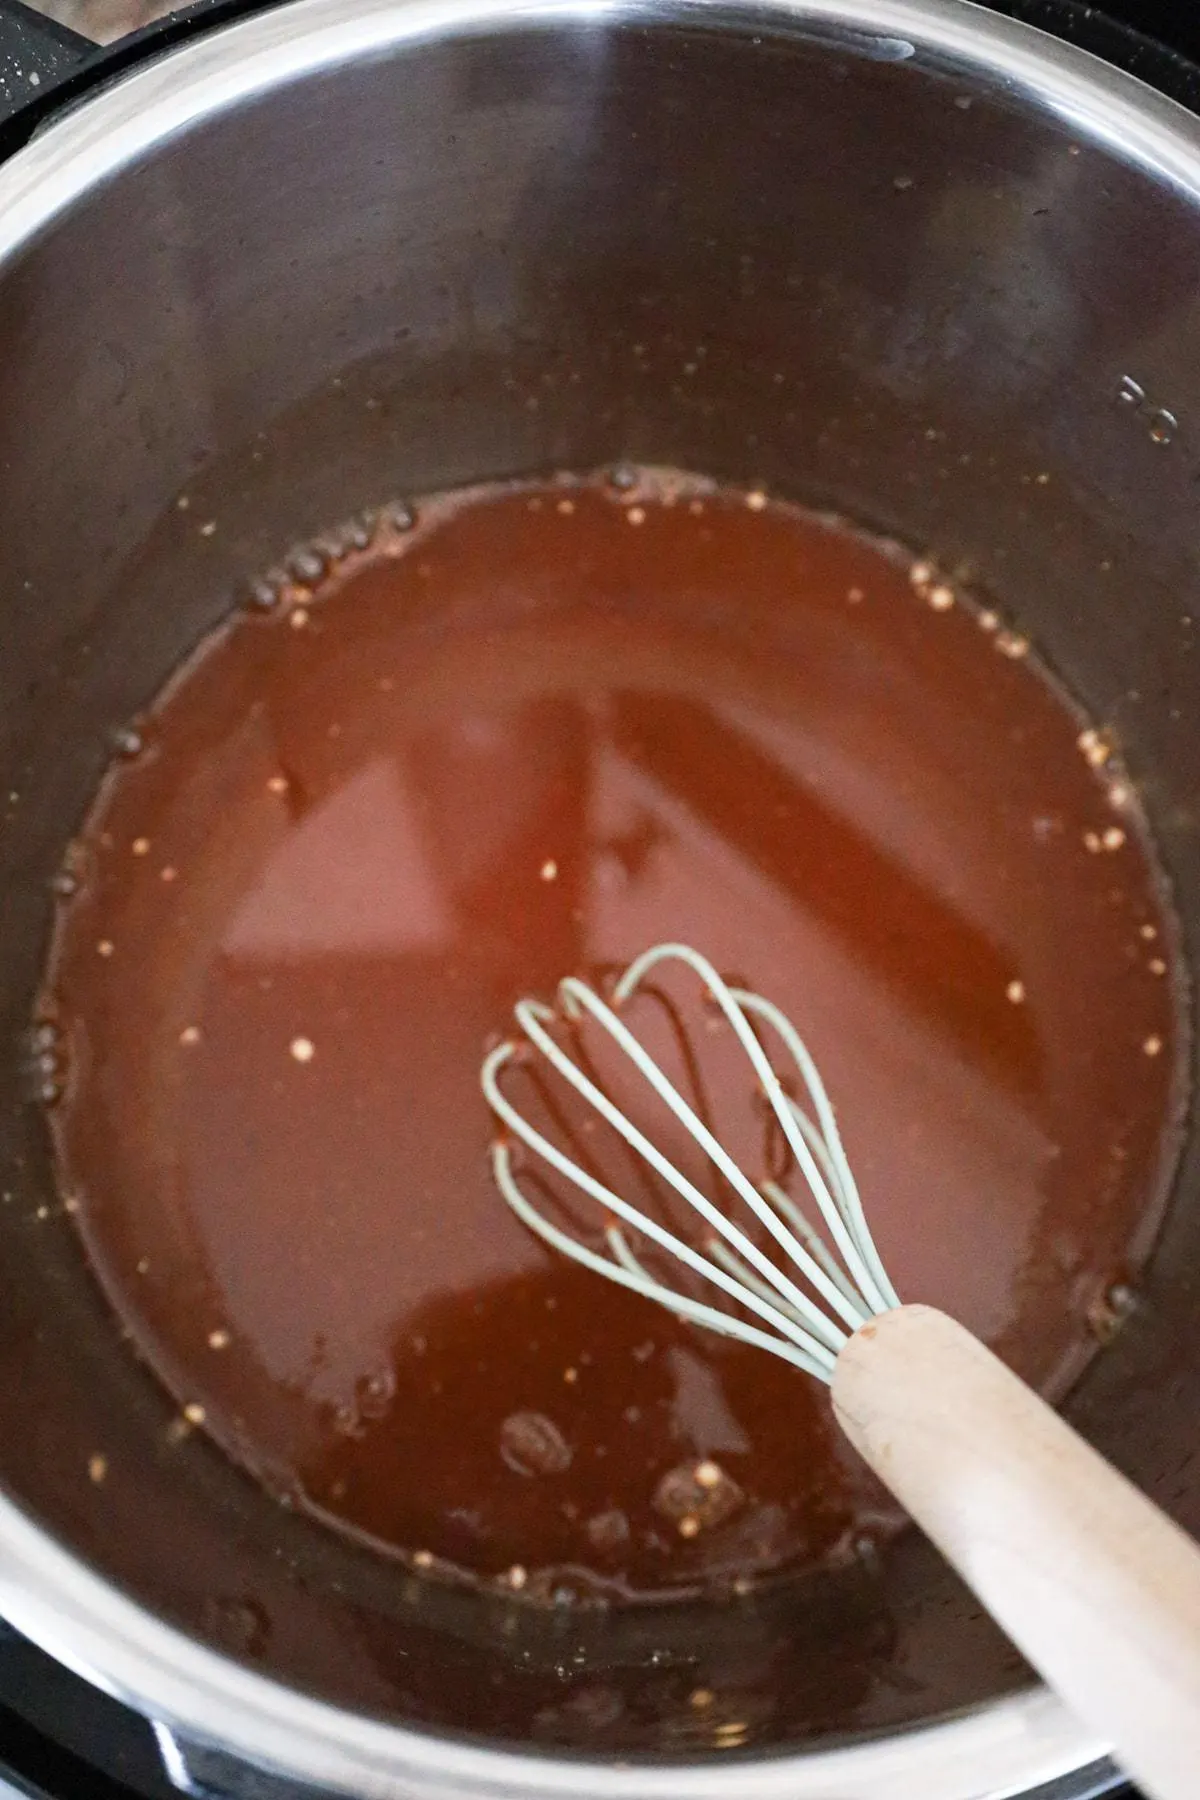 barbecue sauce, apple juice and chicken broth mixture in an Instant Pot